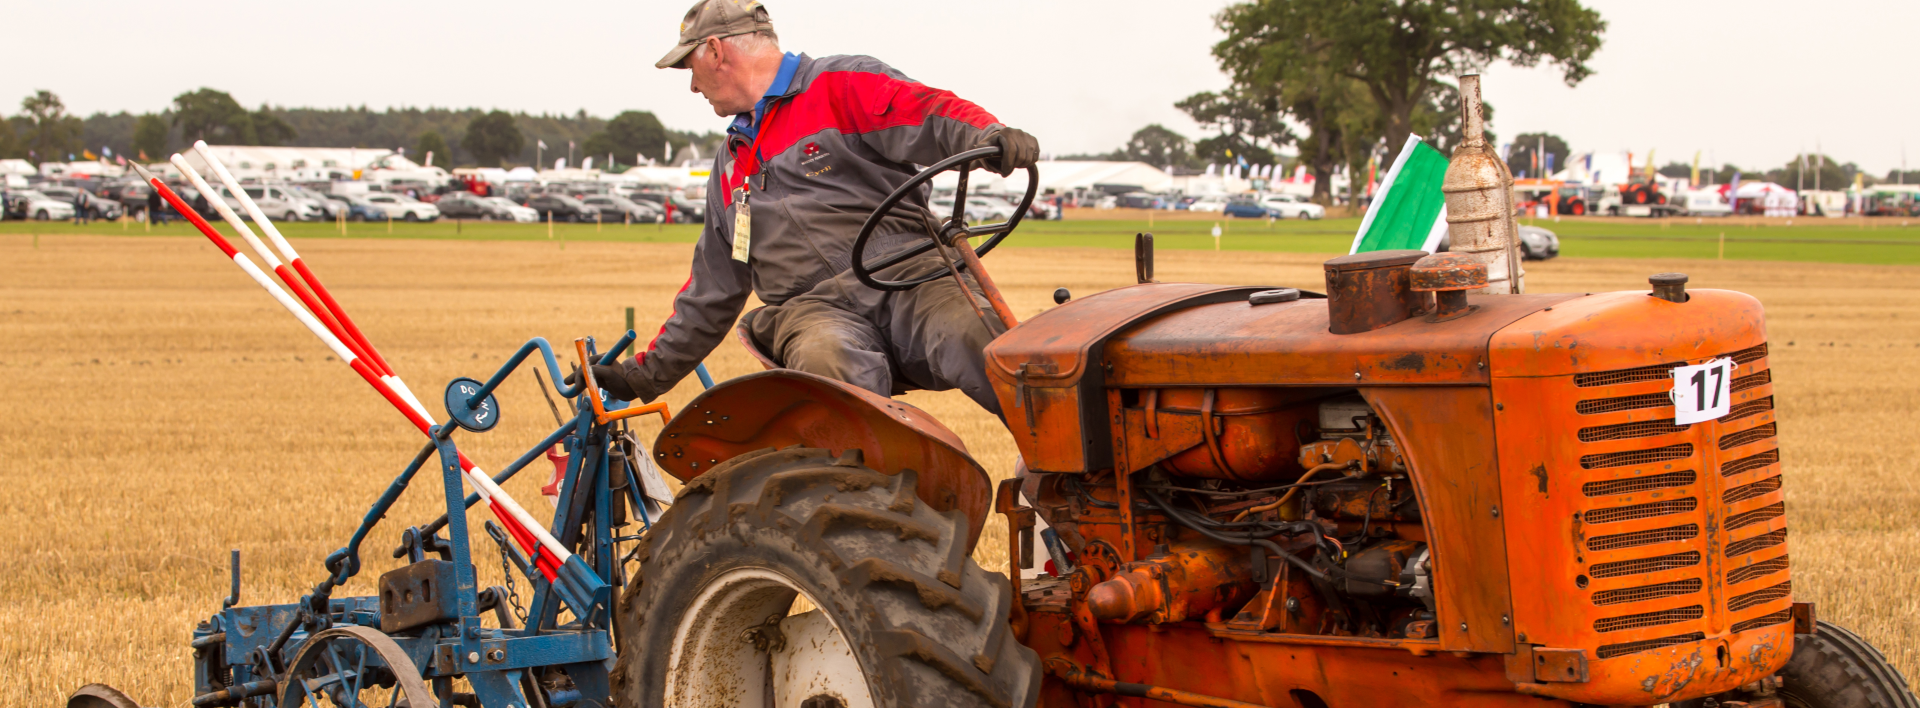 Newtrients at the Ploughing Championships 2018